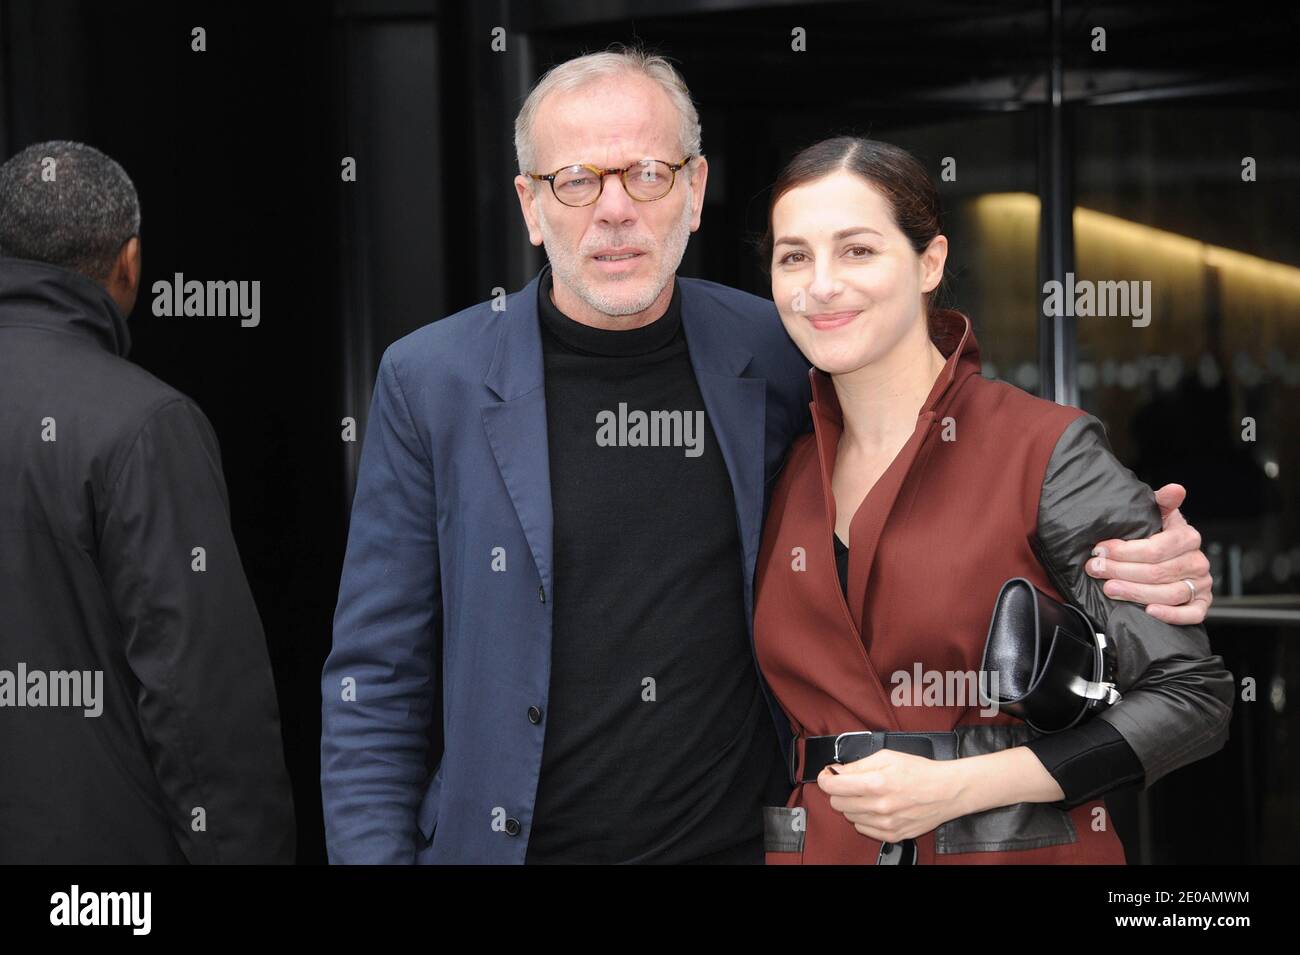 Pascal Greggory and Amira Casar leaving the Balenciaga Fall-Winter  2012-2013 Ready-To-Wear collection show held at Quai Javel in Paris, France  on March 1, 2012, as part of the Paris Fashion Week. Photo